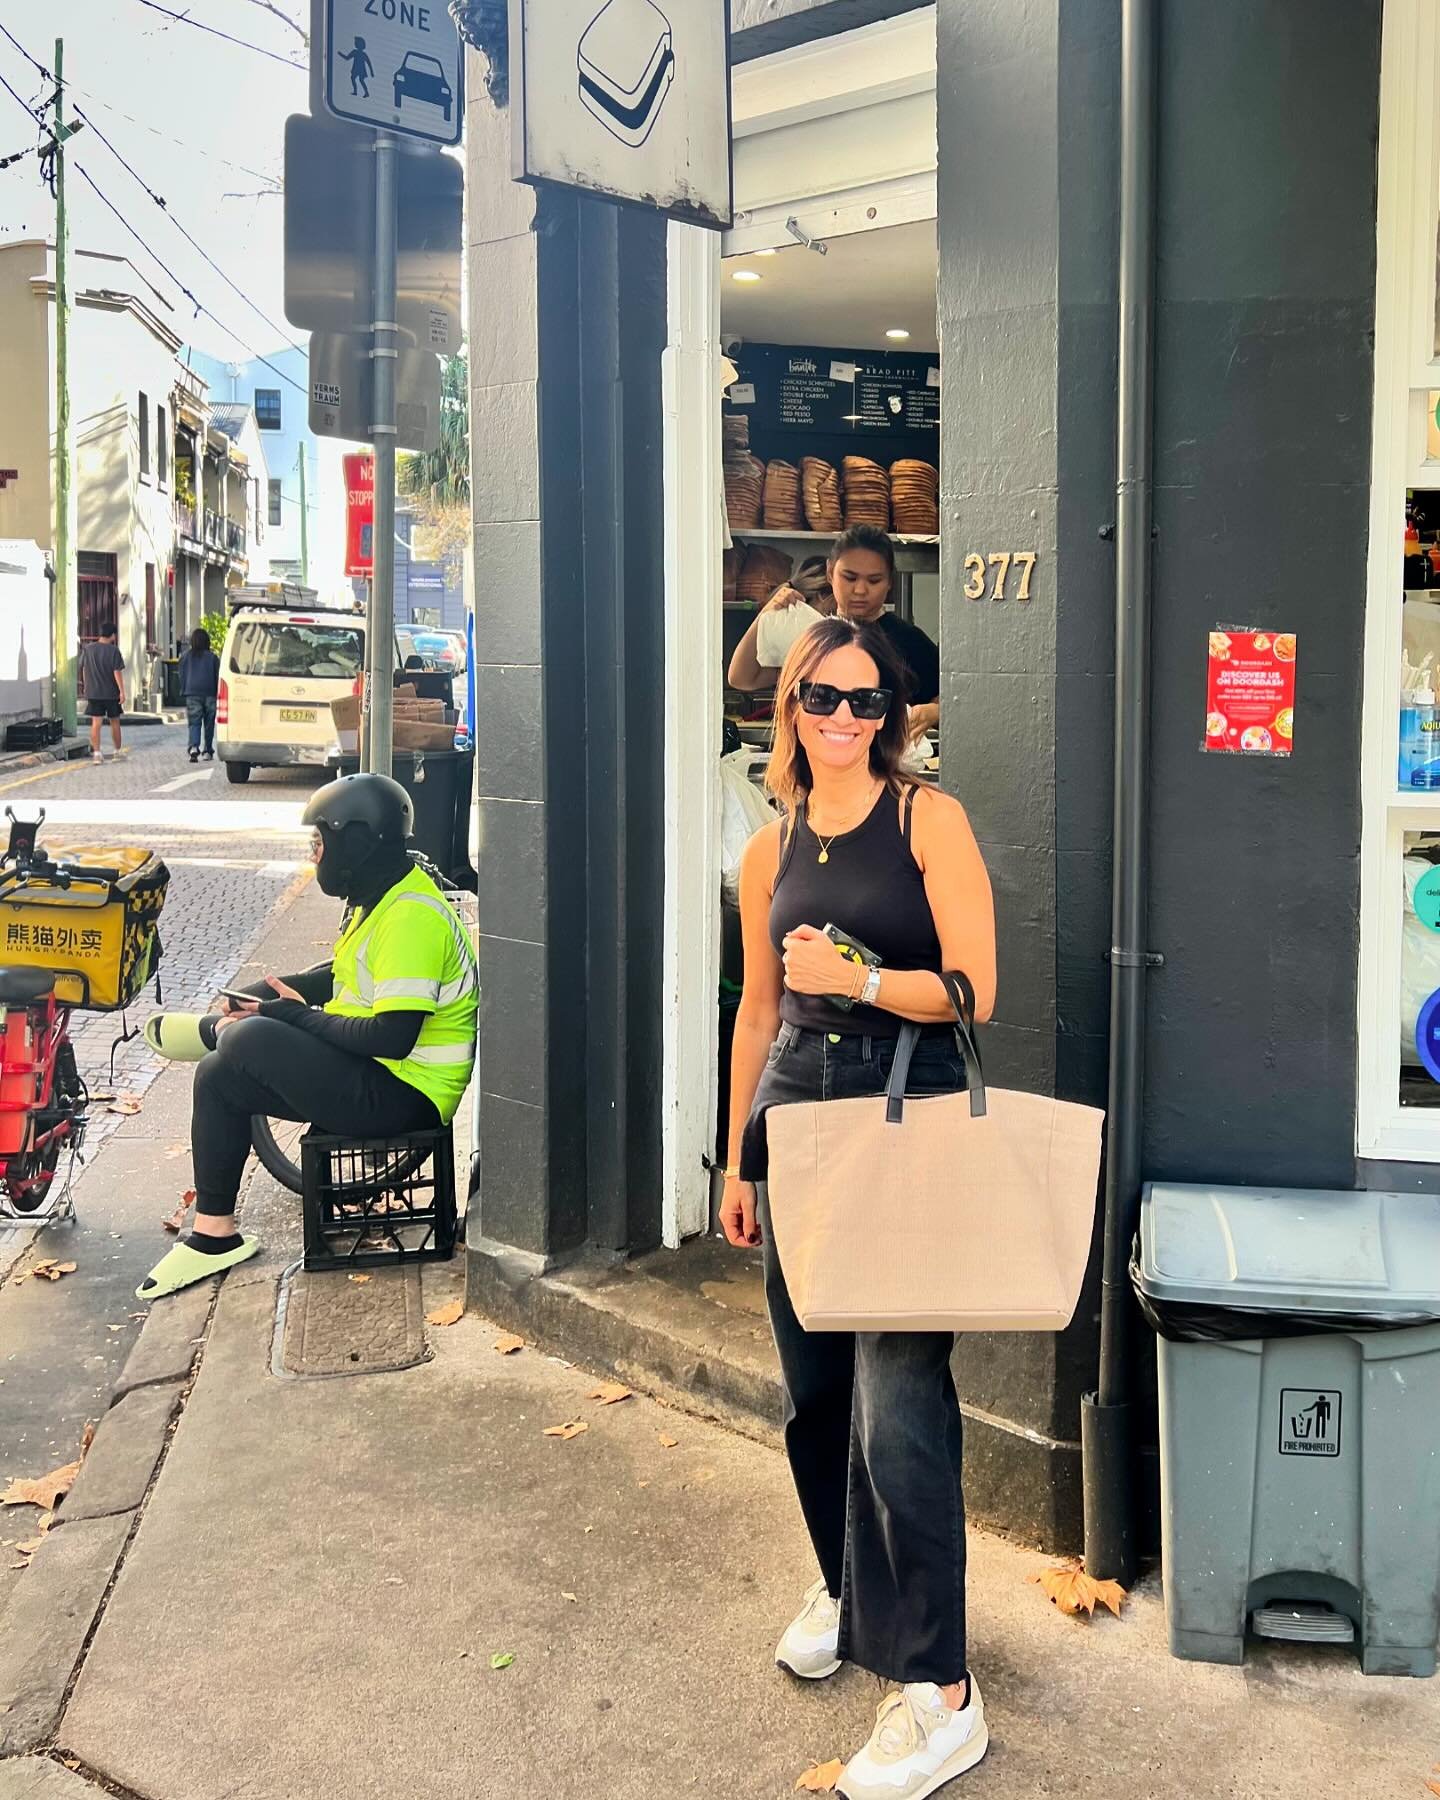 New Managing Director, Romi Okun - @rokunromi enjoying some downtime during client visits in Sydney and looking chic in @richandroyalofficial discovering South Dowling Street with sales director @josephborchan behind the camera. #fashion #roadtrip #s